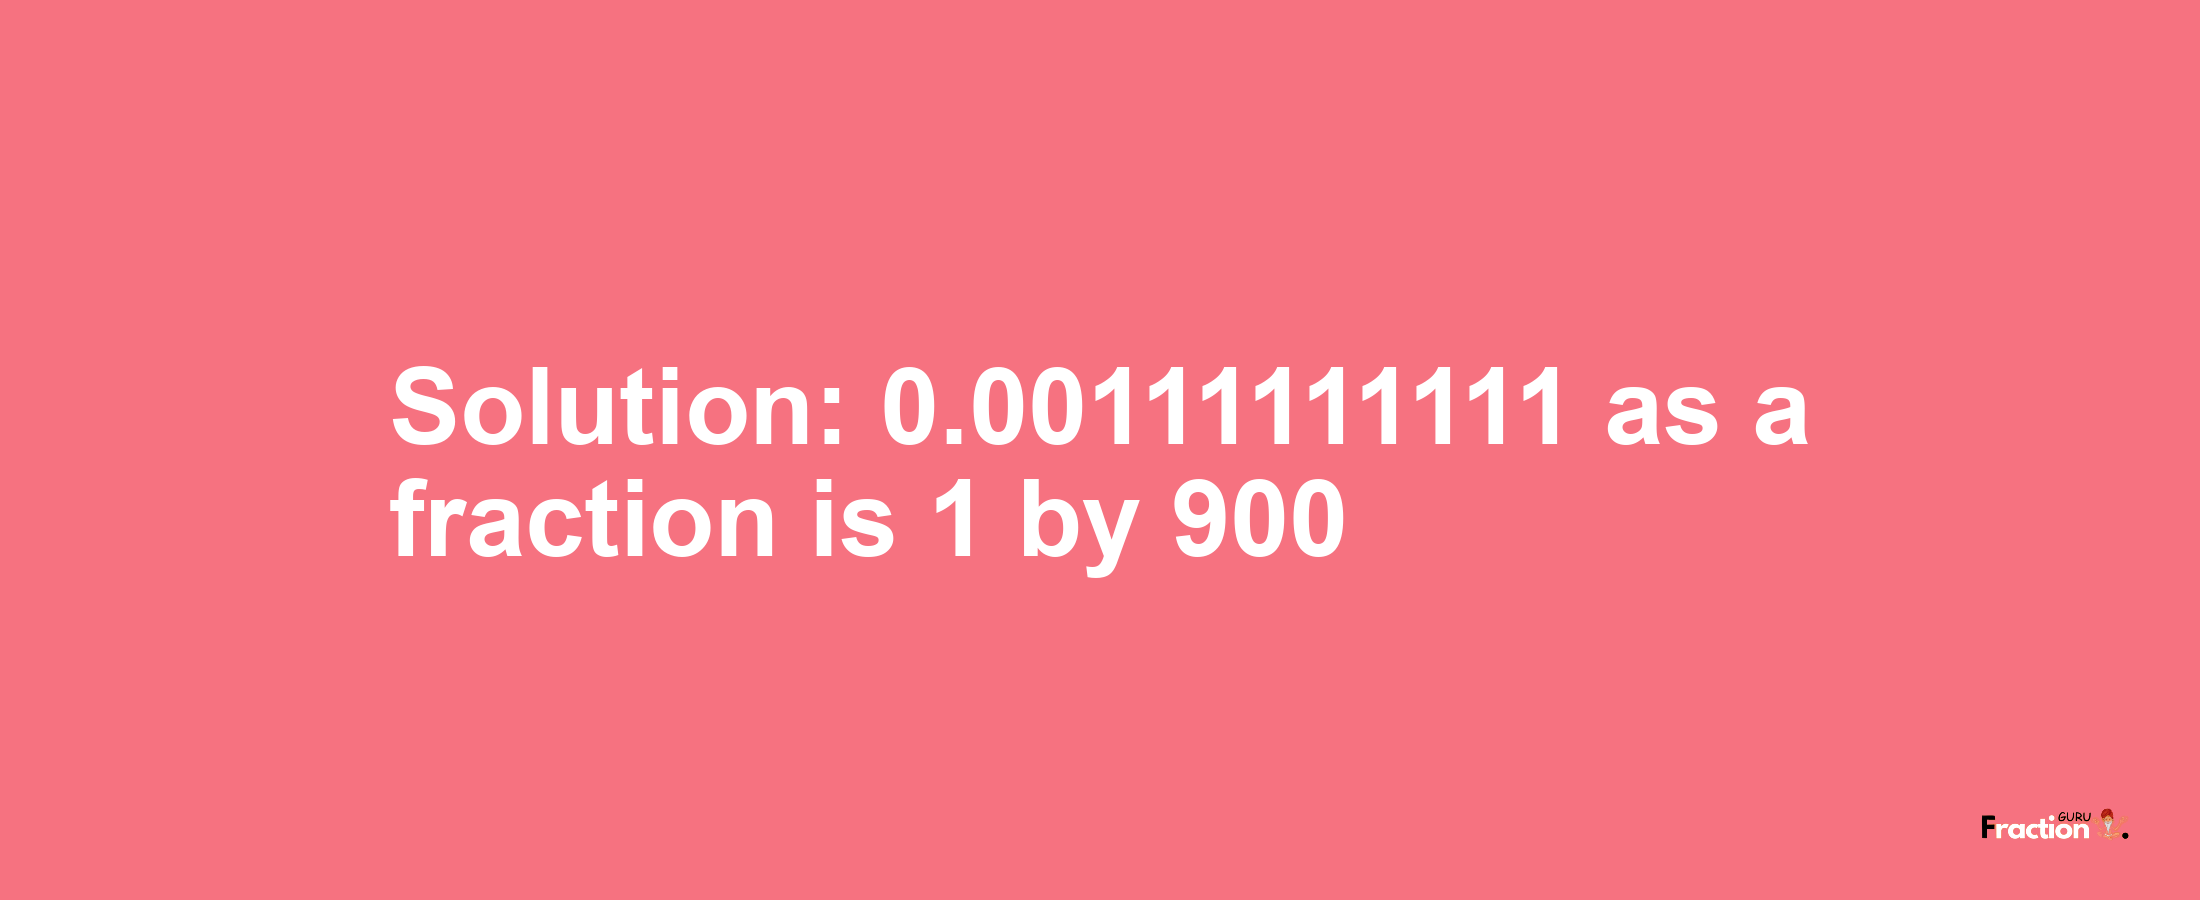 Solution:0.00111111111 as a fraction is 1/900